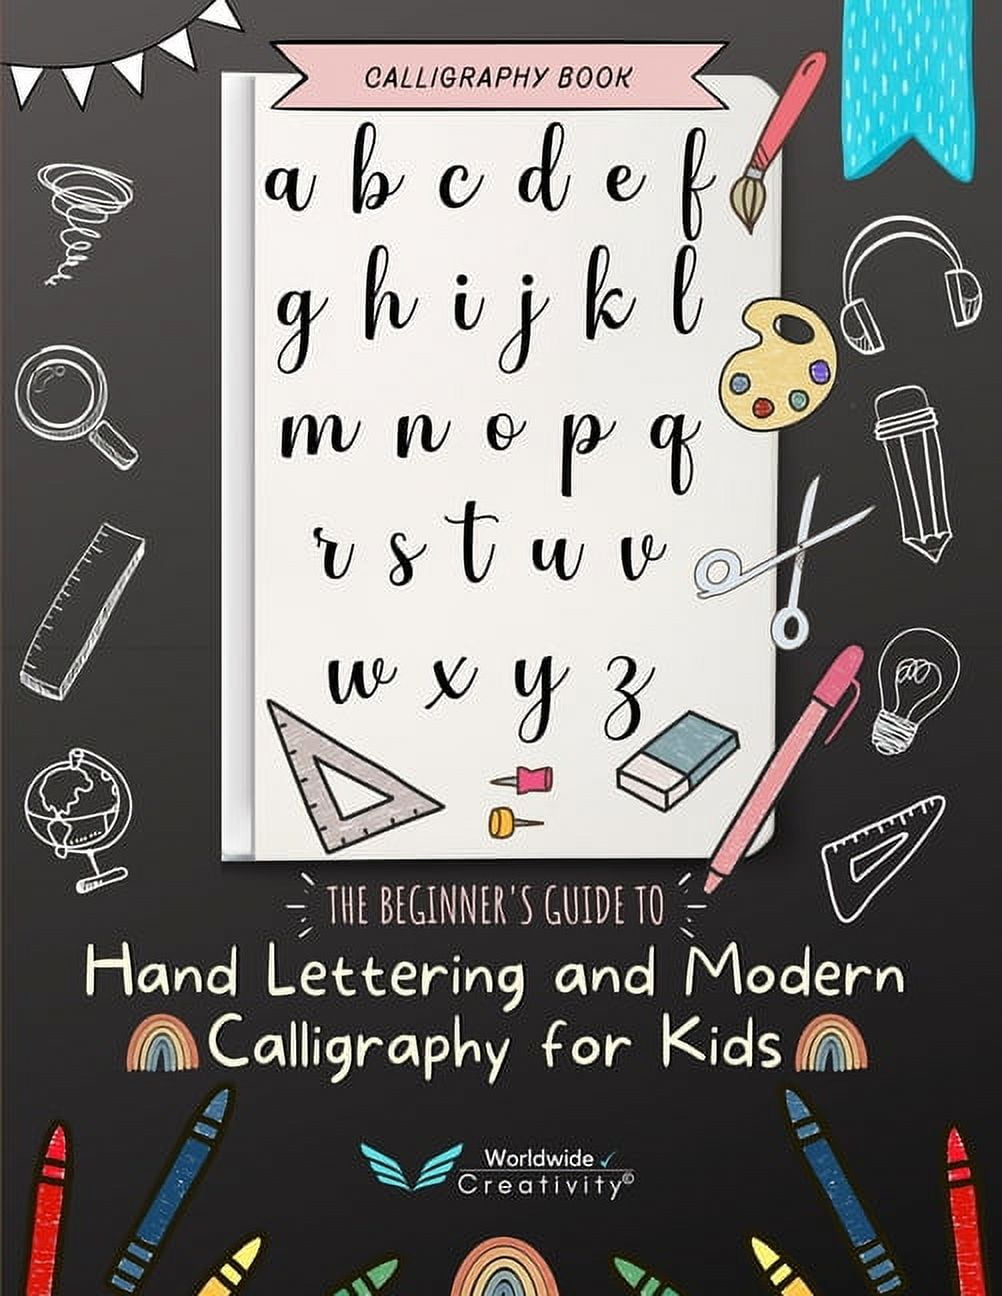 Learn Calligraphy In A Modern Way - Guide + Workbook – Bre Design Co